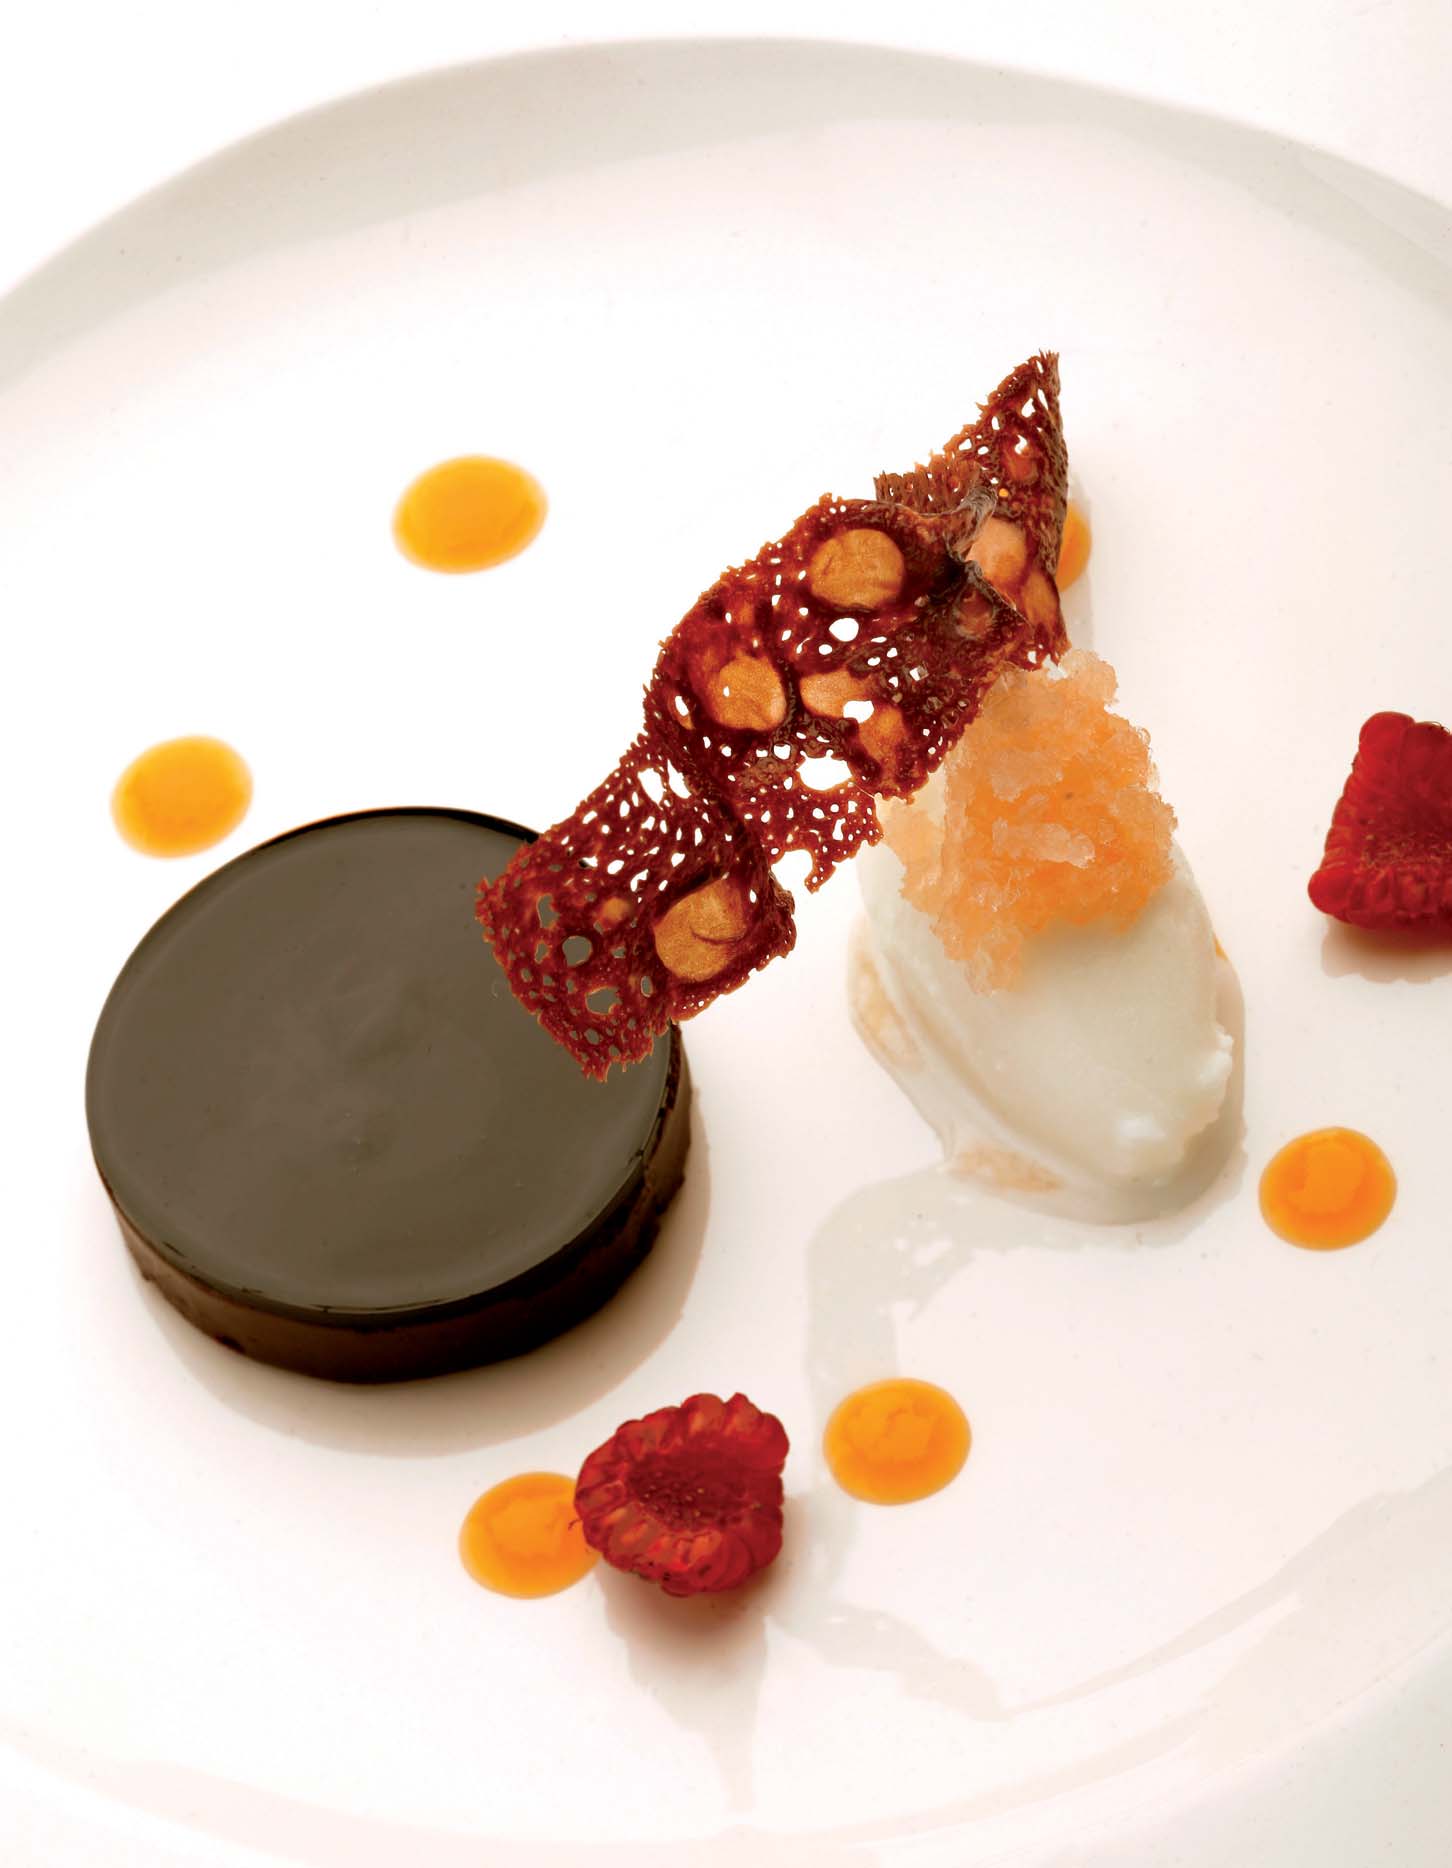 Chocolate ganache with Palo de Mallorca, pink grapefruit granite, mandarin and Mallorcan olive oil sauce and a Red Bull and lychee sorbet - Recipes - Gastronomy - Balearic Islands - Agrifoodstuffs, designations of origin and Balearic gastronomy